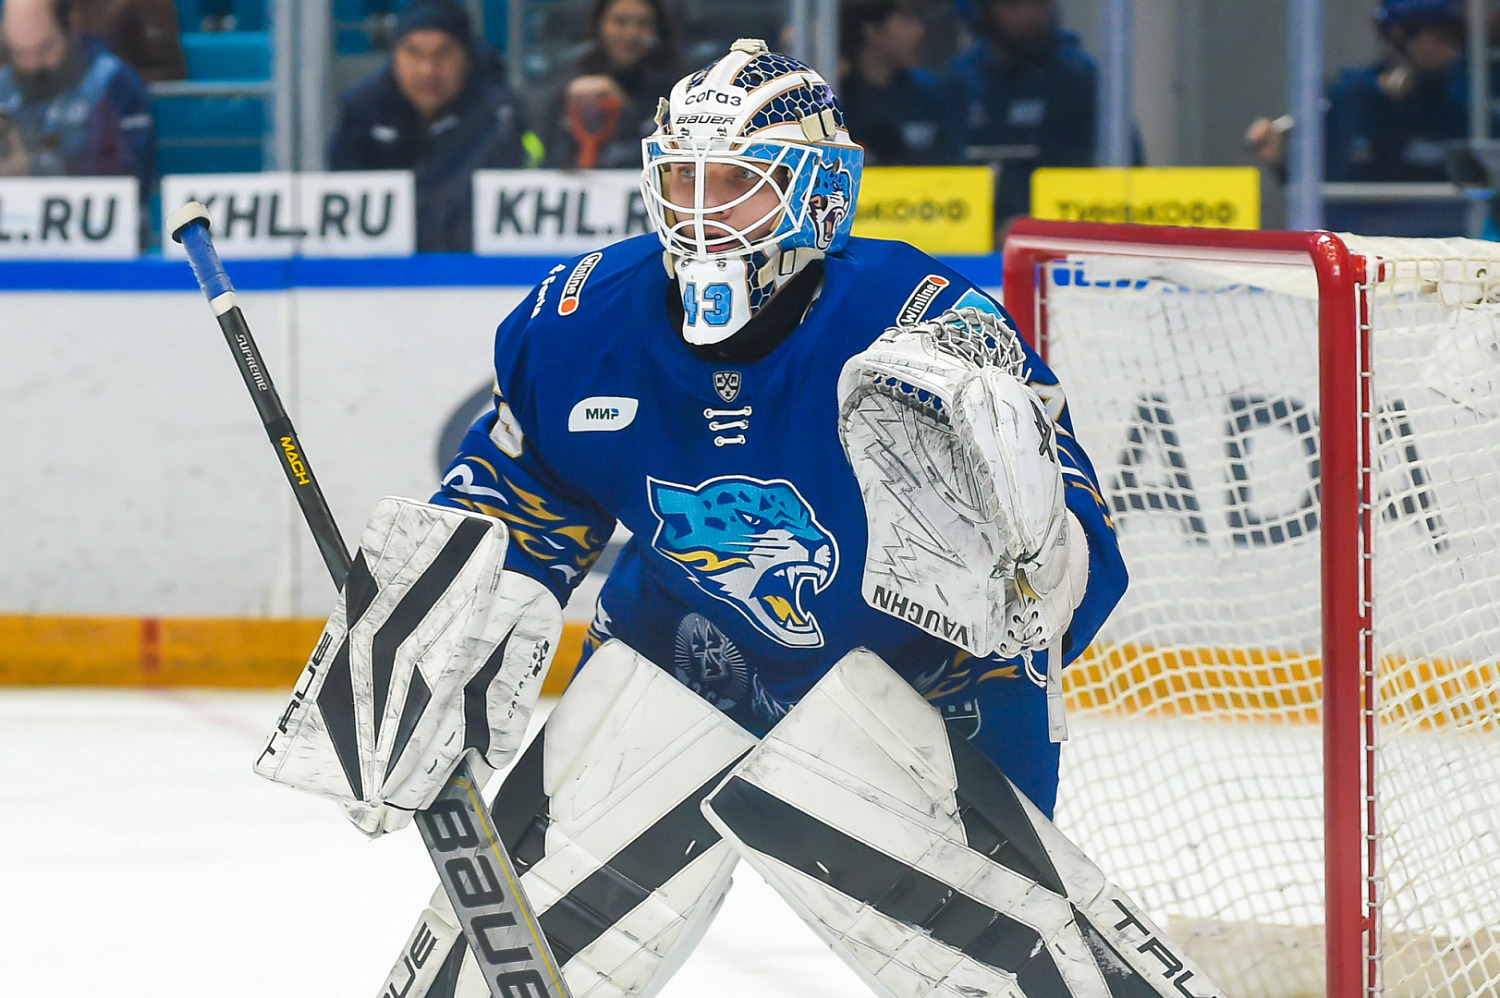 Barys made qualification offers to a number of players